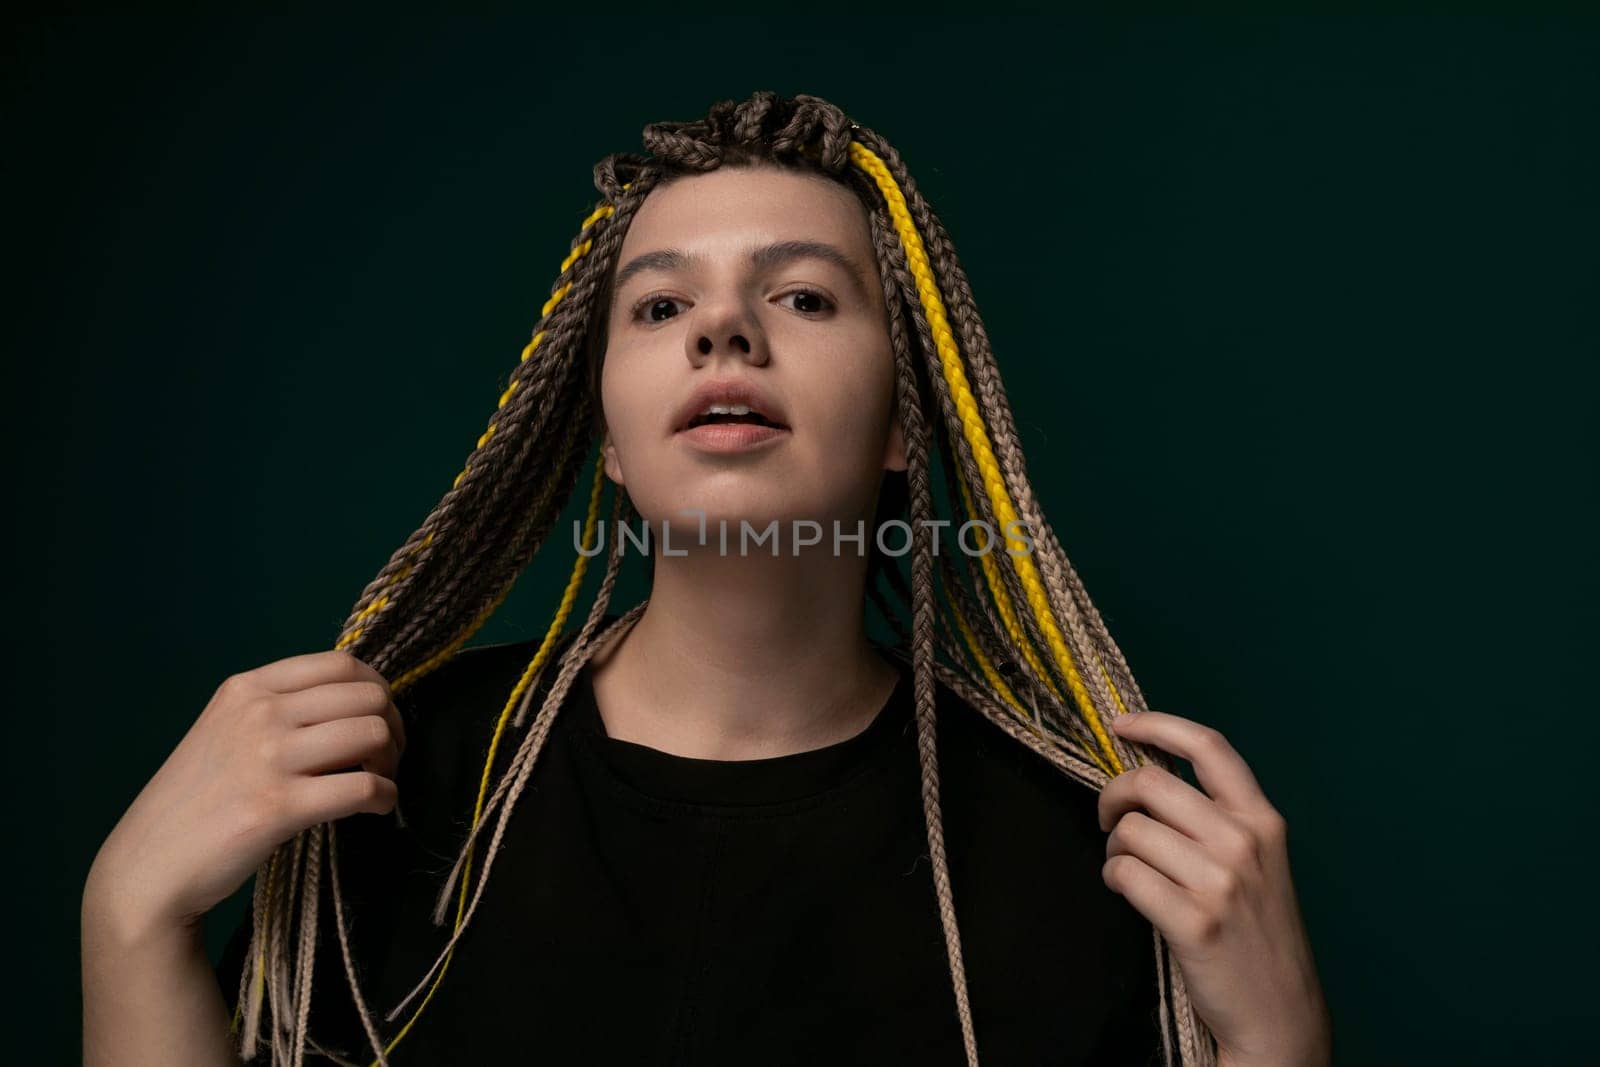 A woman with dreadlocks is standing upright in front of a vivid green background. Her hair is styled in long, thick dreadlocks that cascade down her back. She is looking confidently at the camera, exuding a sense of strength and individuality.